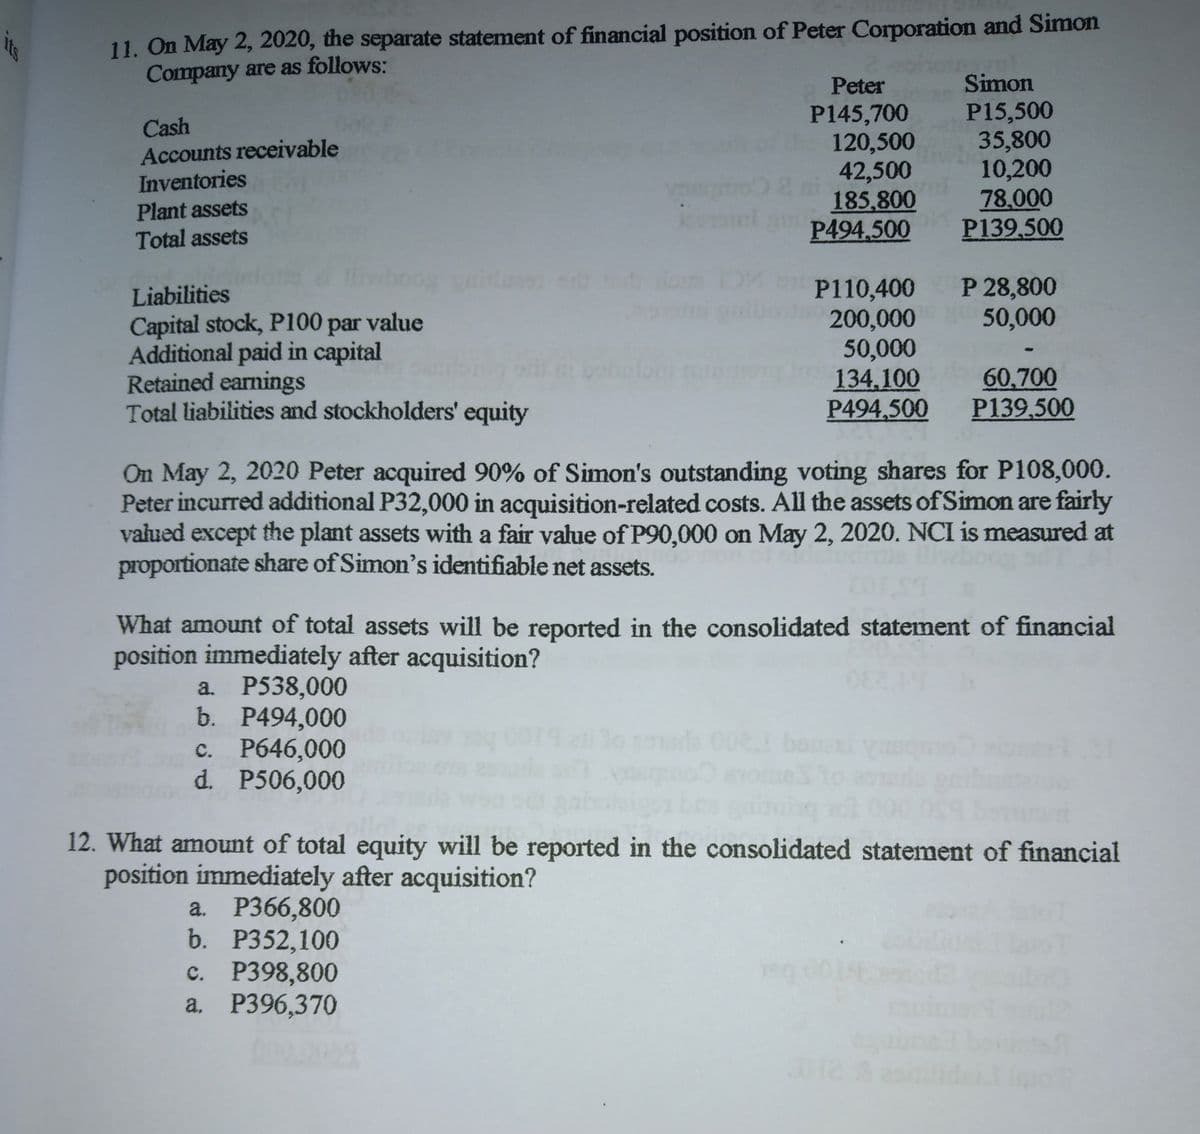 11. On May 2, 2020, the separate statement of financial position of Peter Corporation and Simon
Company are as follows:
Peter
Simon
P145,700
120,500
42,500
185,800
P494.500
P15,500
35,800
10,200
78.000
P139,500
Cash
Accounts receivable
Inventories
Plant assets
Total assets
P110,400 P 28,800
200,000
50,000
134,100
P494,500
Liabilities
50,000
Capital stock, P100 par value
Additional paid in capital
Retained earnings
Total liabilities and stockholders' equity
bplon
60,700
P139,500
On May 2, 2020 Peter acquired 90% of Simon's outstanding voting shares for P108,000.
Peter incurred additional P32,000 in acquisition-related costs. All the assets of Simon are fairly
valued except the plant assets with a fair value of P90,000 on May 2, 2020. NCI is measured at
proportionate share of Simon's identifiable net assets.
What amount of total assets will be reported in the consolidated statement of financial
position immediately after acquisition?
a. P538,000
b. P494,000
c. P646,000
d. P506,000
12. What amount of total equity will be reported in the consolidated statement of financial
position immediately after acquisition?
a. P366,800
b. Р352,100
с. Р398,800
a. P396,370
ts
